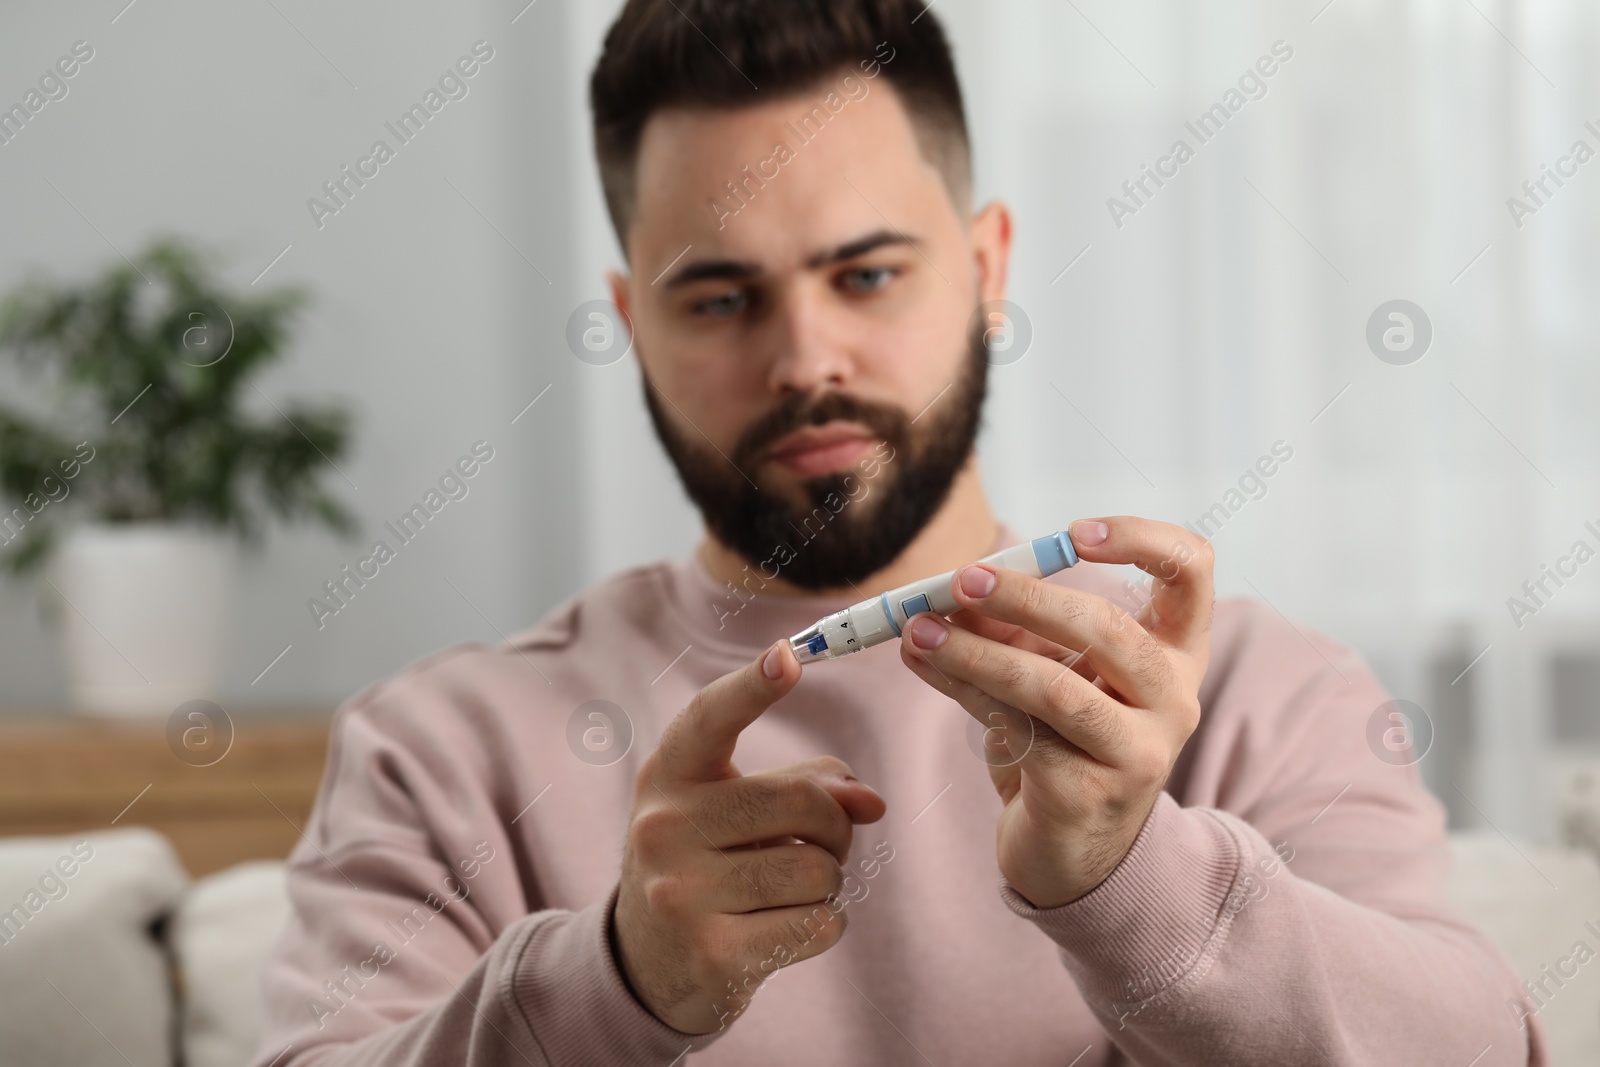 Photo of Diabetes test. Man checking blood sugar level with lancet pen at home, selective focus